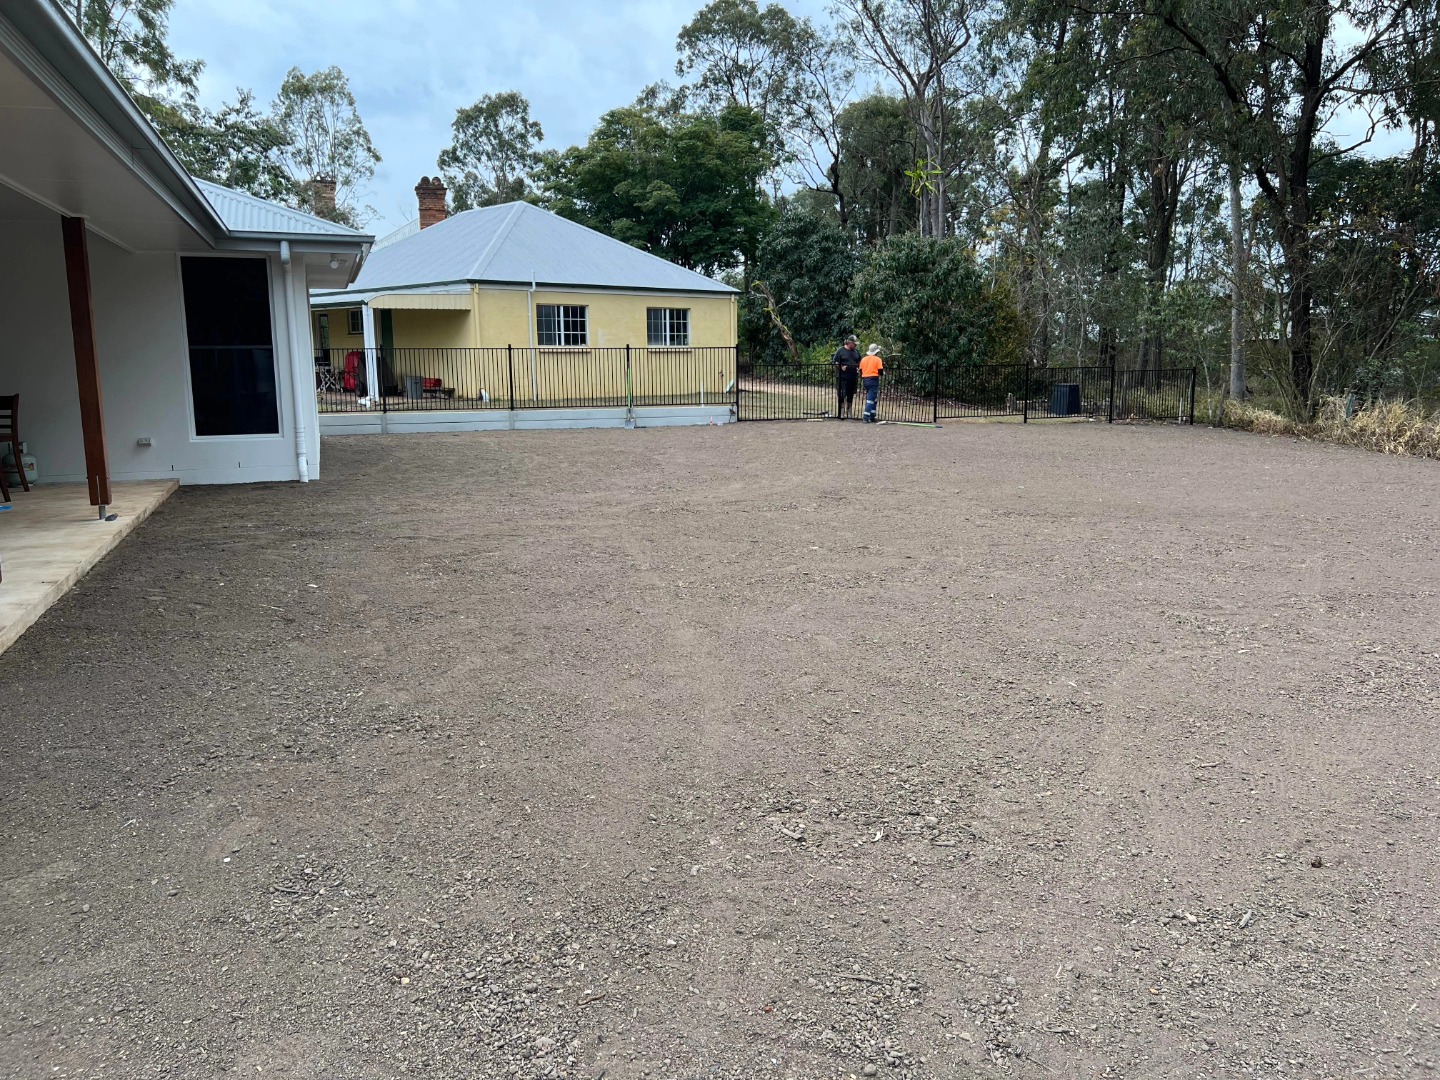 With the hard work behind us, it's time to witness the true transformation. Freshly laid turf adds a lush and inviting carpet to the newly leveled yard.